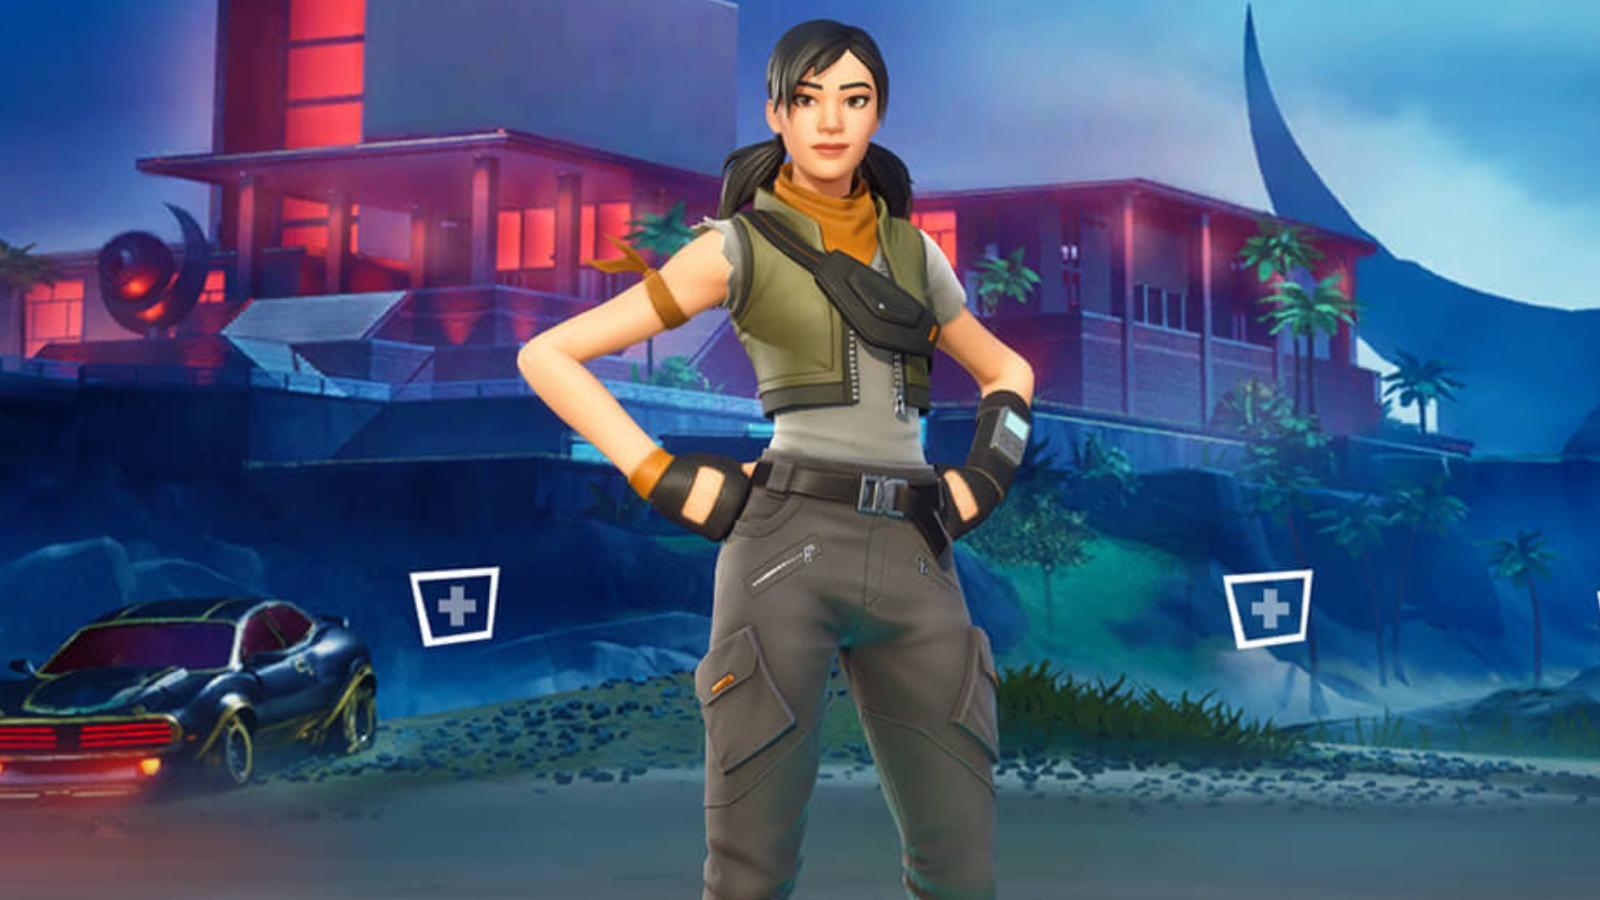 A screenshot of one of the default skins in Fortnite.